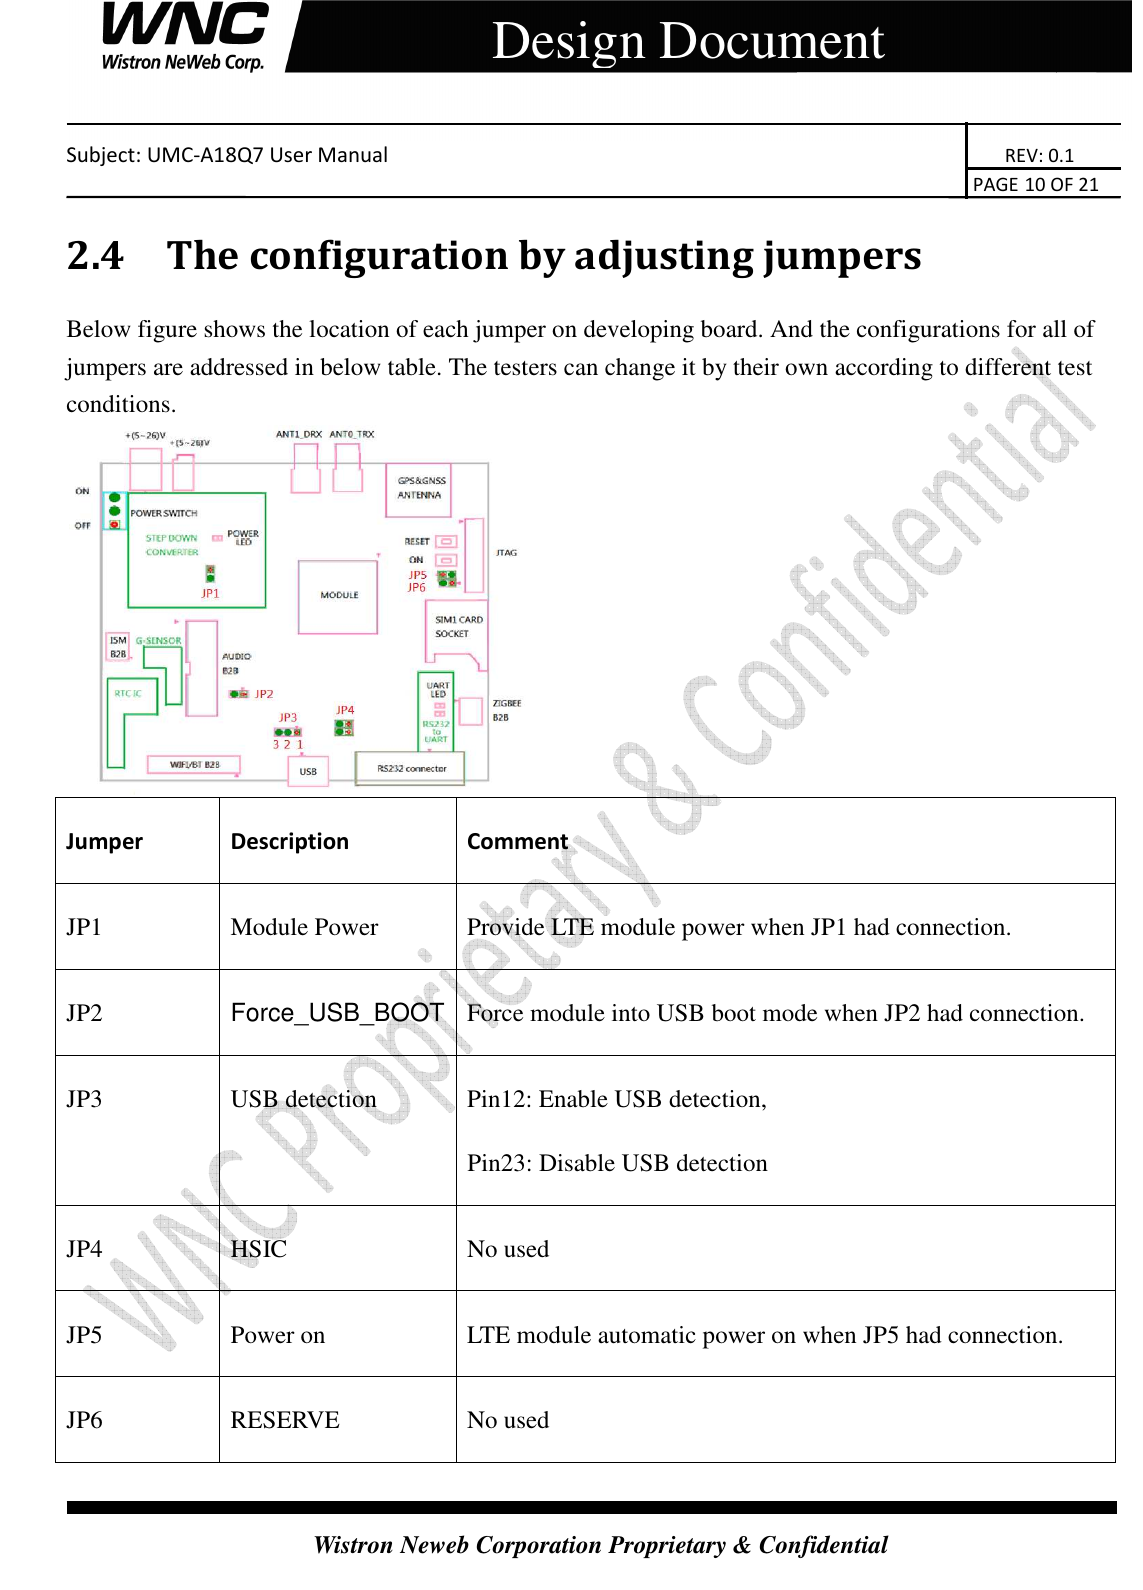    Subject: UMC-A18Q7 User Manual                                                                       REV: 0.1                                                                                                                                                                               PAGE 10 OF 21  Wistron Neweb Corporation Proprietary &amp; Confidential     Design Document 2.4    The configuration by adjusting jumpers Below figure shows the location of each jumper on developing board. And the configurations for all of jumpers are addressed in below table. The testers can change it by their own according to different test conditions.  Jumper  Description  Comment JP1  Module Power    Provide LTE module power when JP1 had connection. JP2  Force_USB_BOOT Force module into USB boot mode when JP2 had connection. JP3  USB detection  Pin12: Enable USB detection,   Pin23: Disable USB detection JP4  HSIC  No used JP5  Power on  LTE module automatic power on when JP5 had connection. JP6  RESERVE  No used  